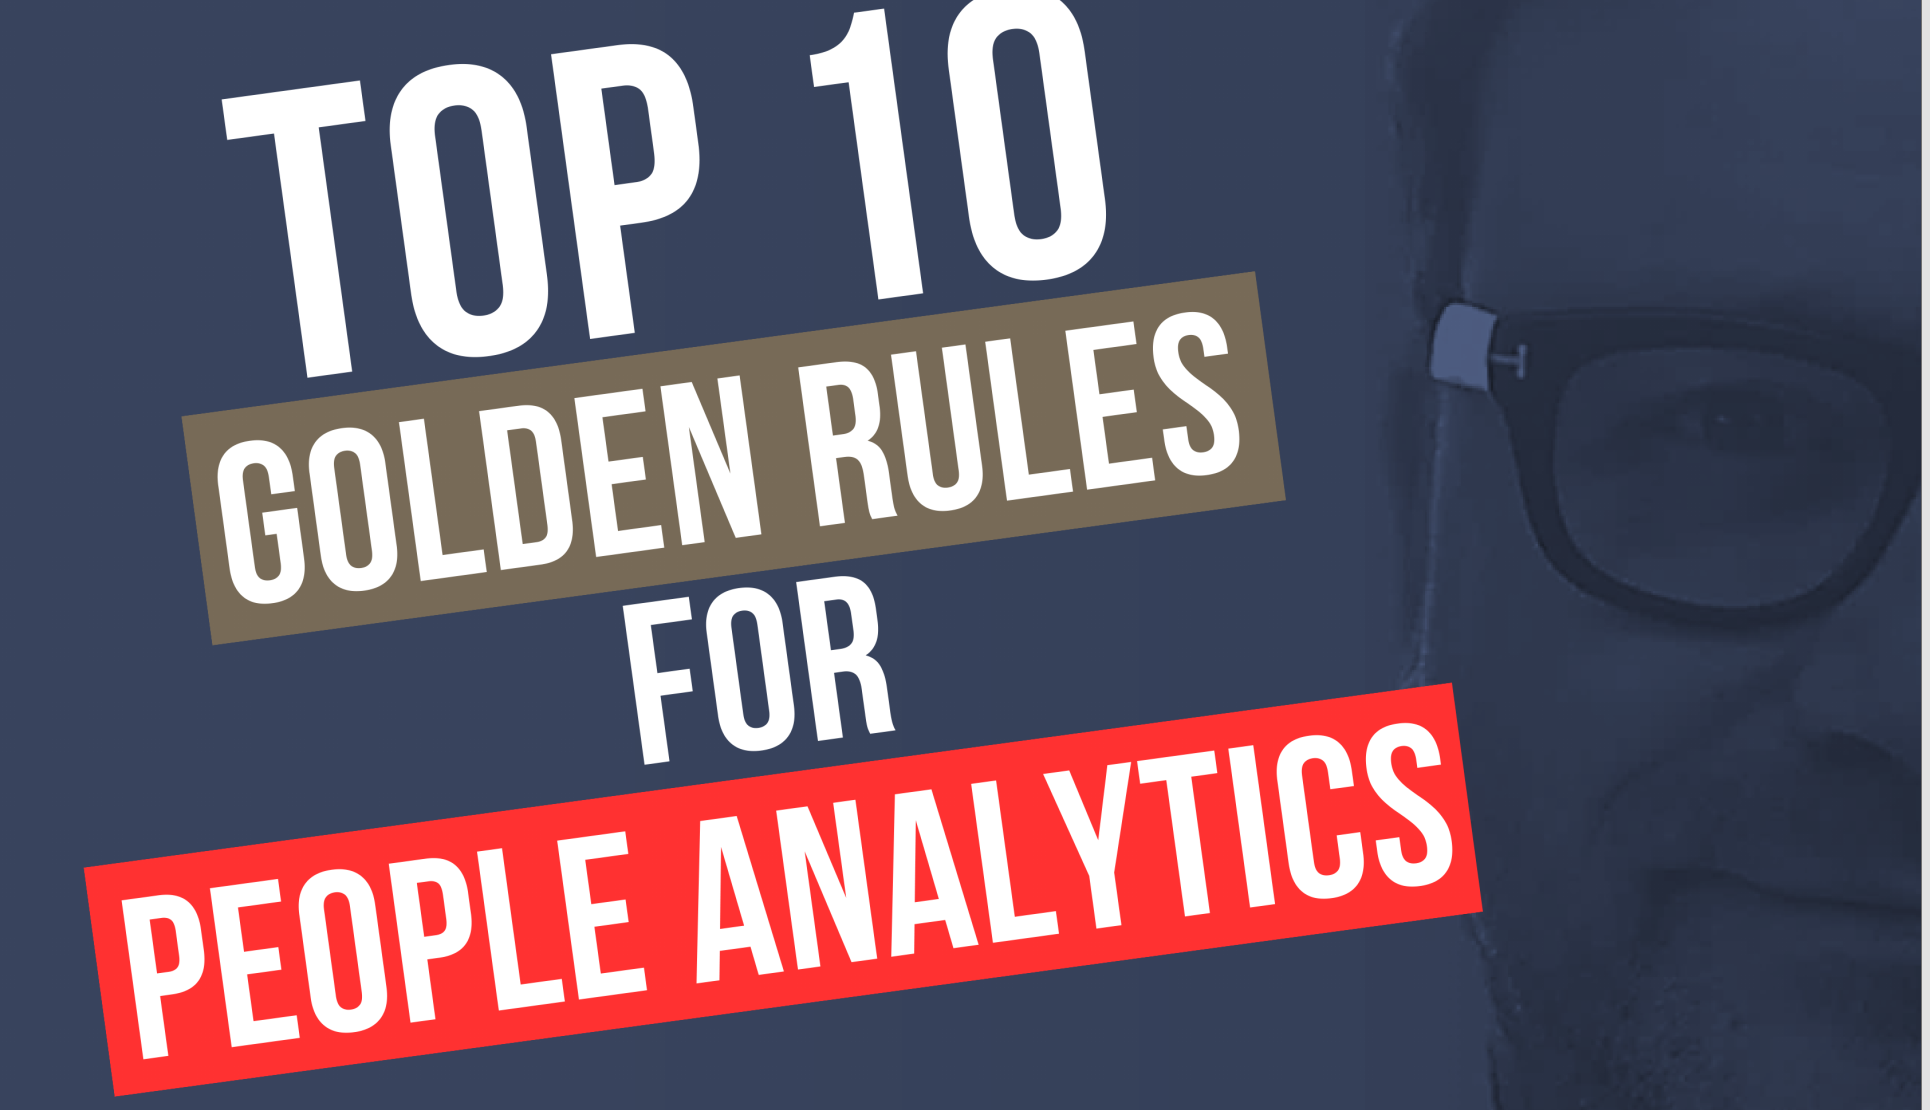 The 10 golden rules for establishing a people analytics practice